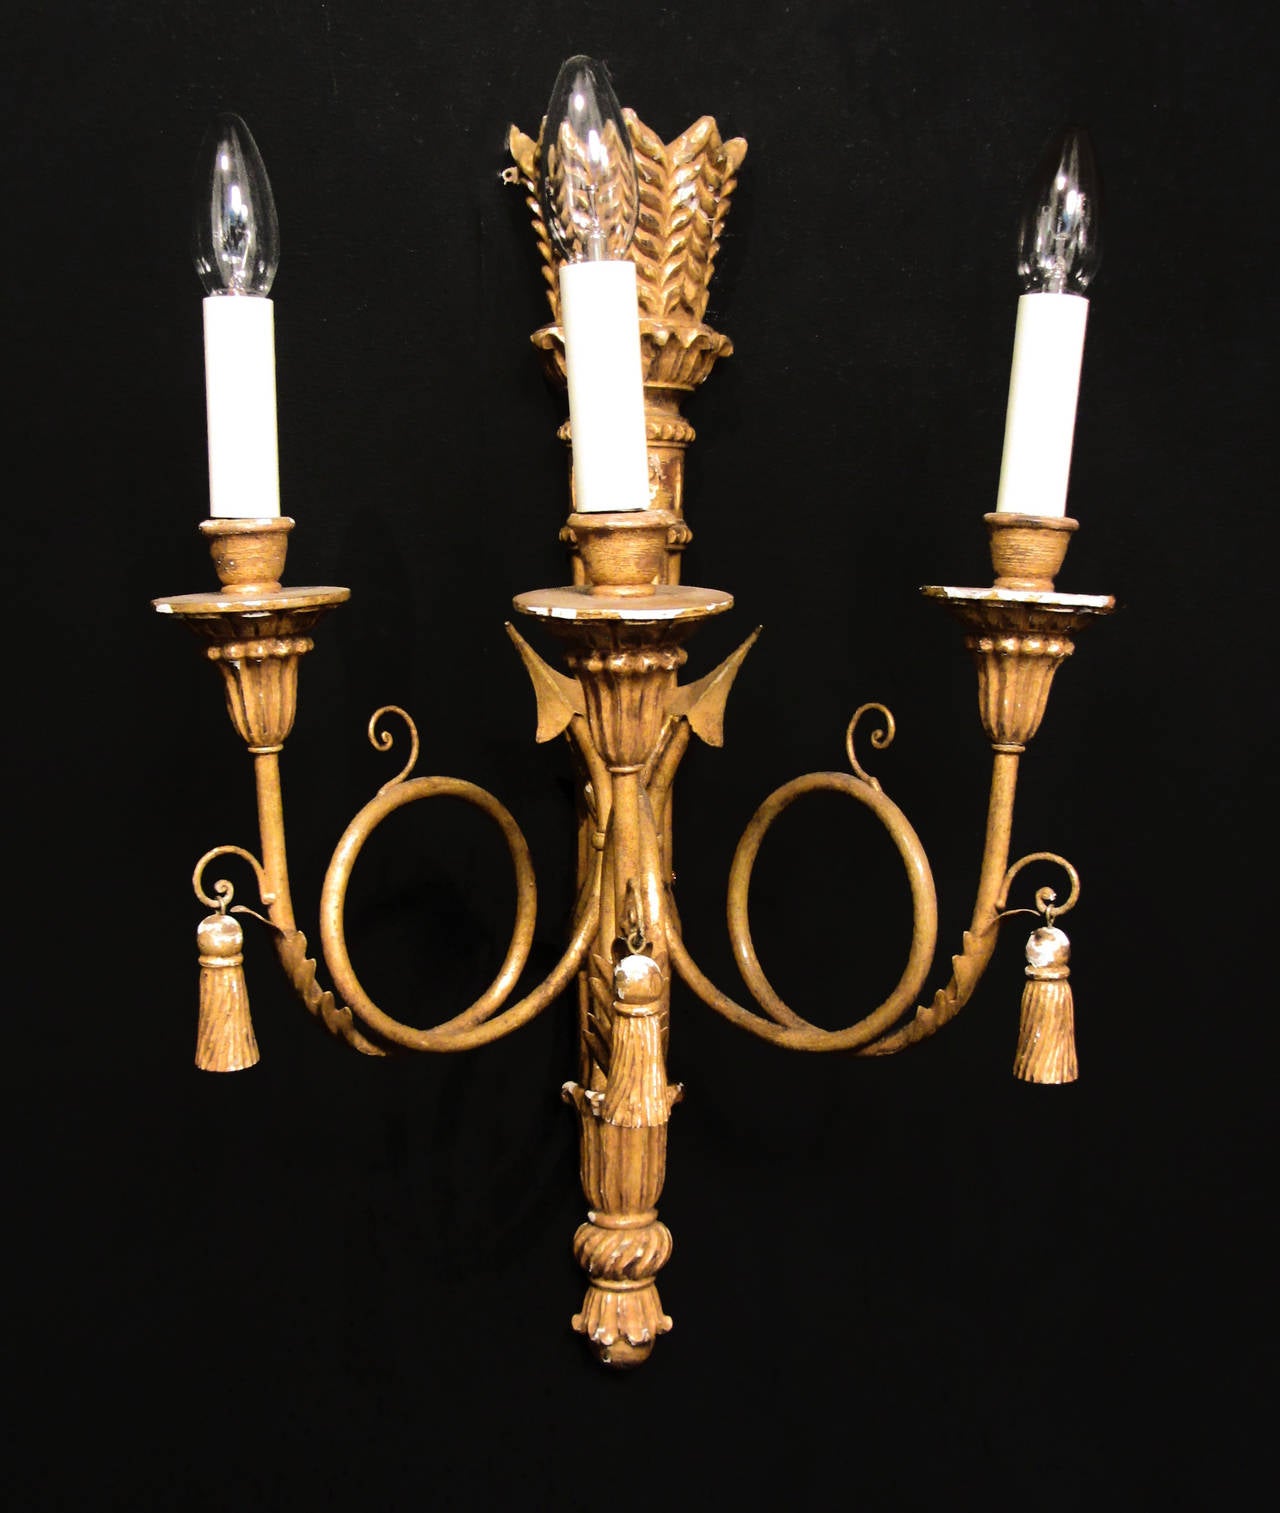 A set of four, large, richly carved giltwood, three-arm Empire style wall appliqués. The decorative scrolling design in the form of a quiver with three looped branches supporting the candle holders. Can be sold in pairs. Professionally wired for